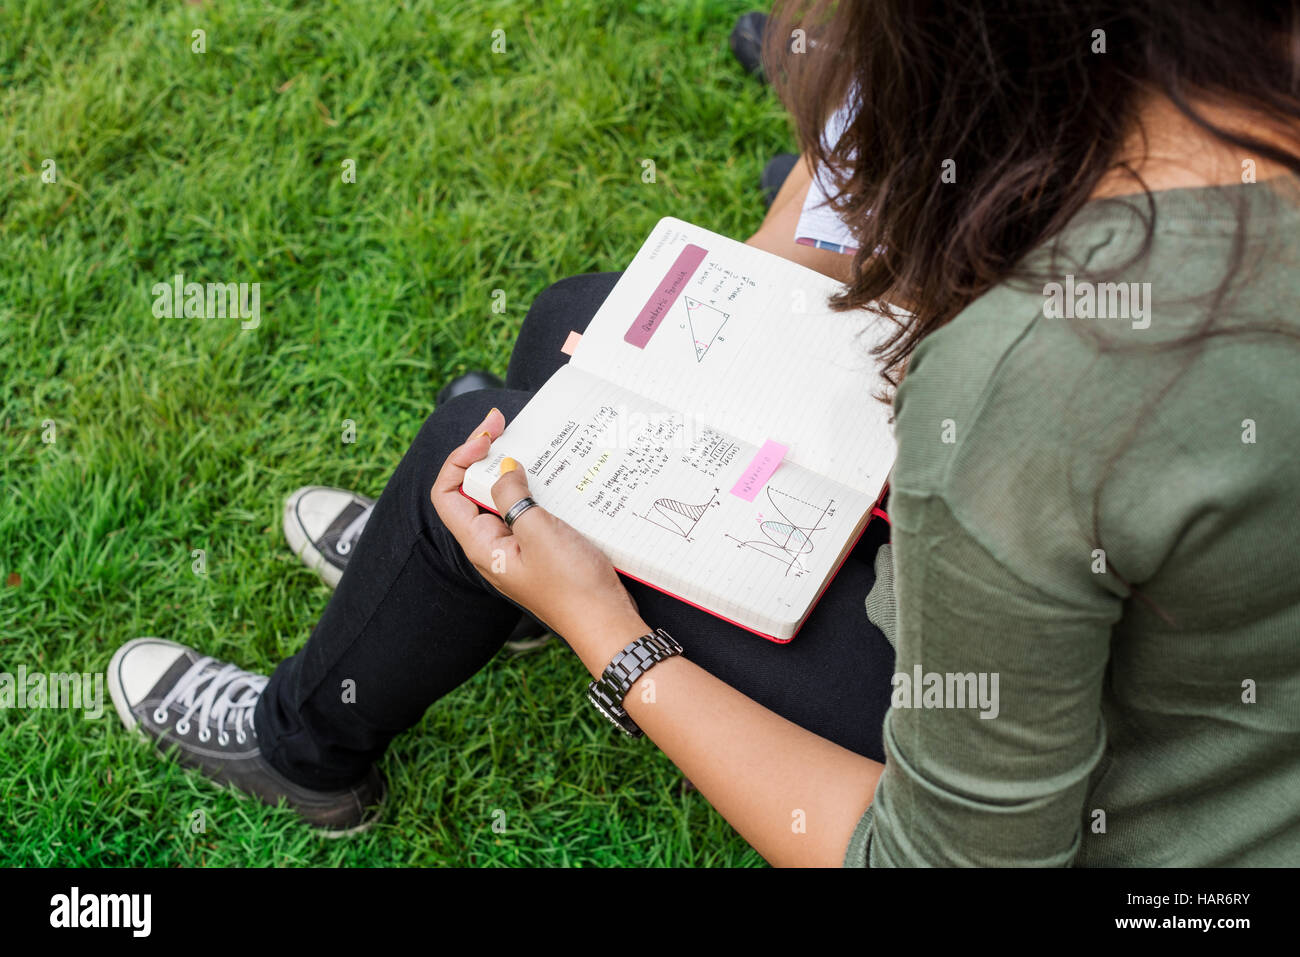 Education Students People Knowledge Concept Stock Photo